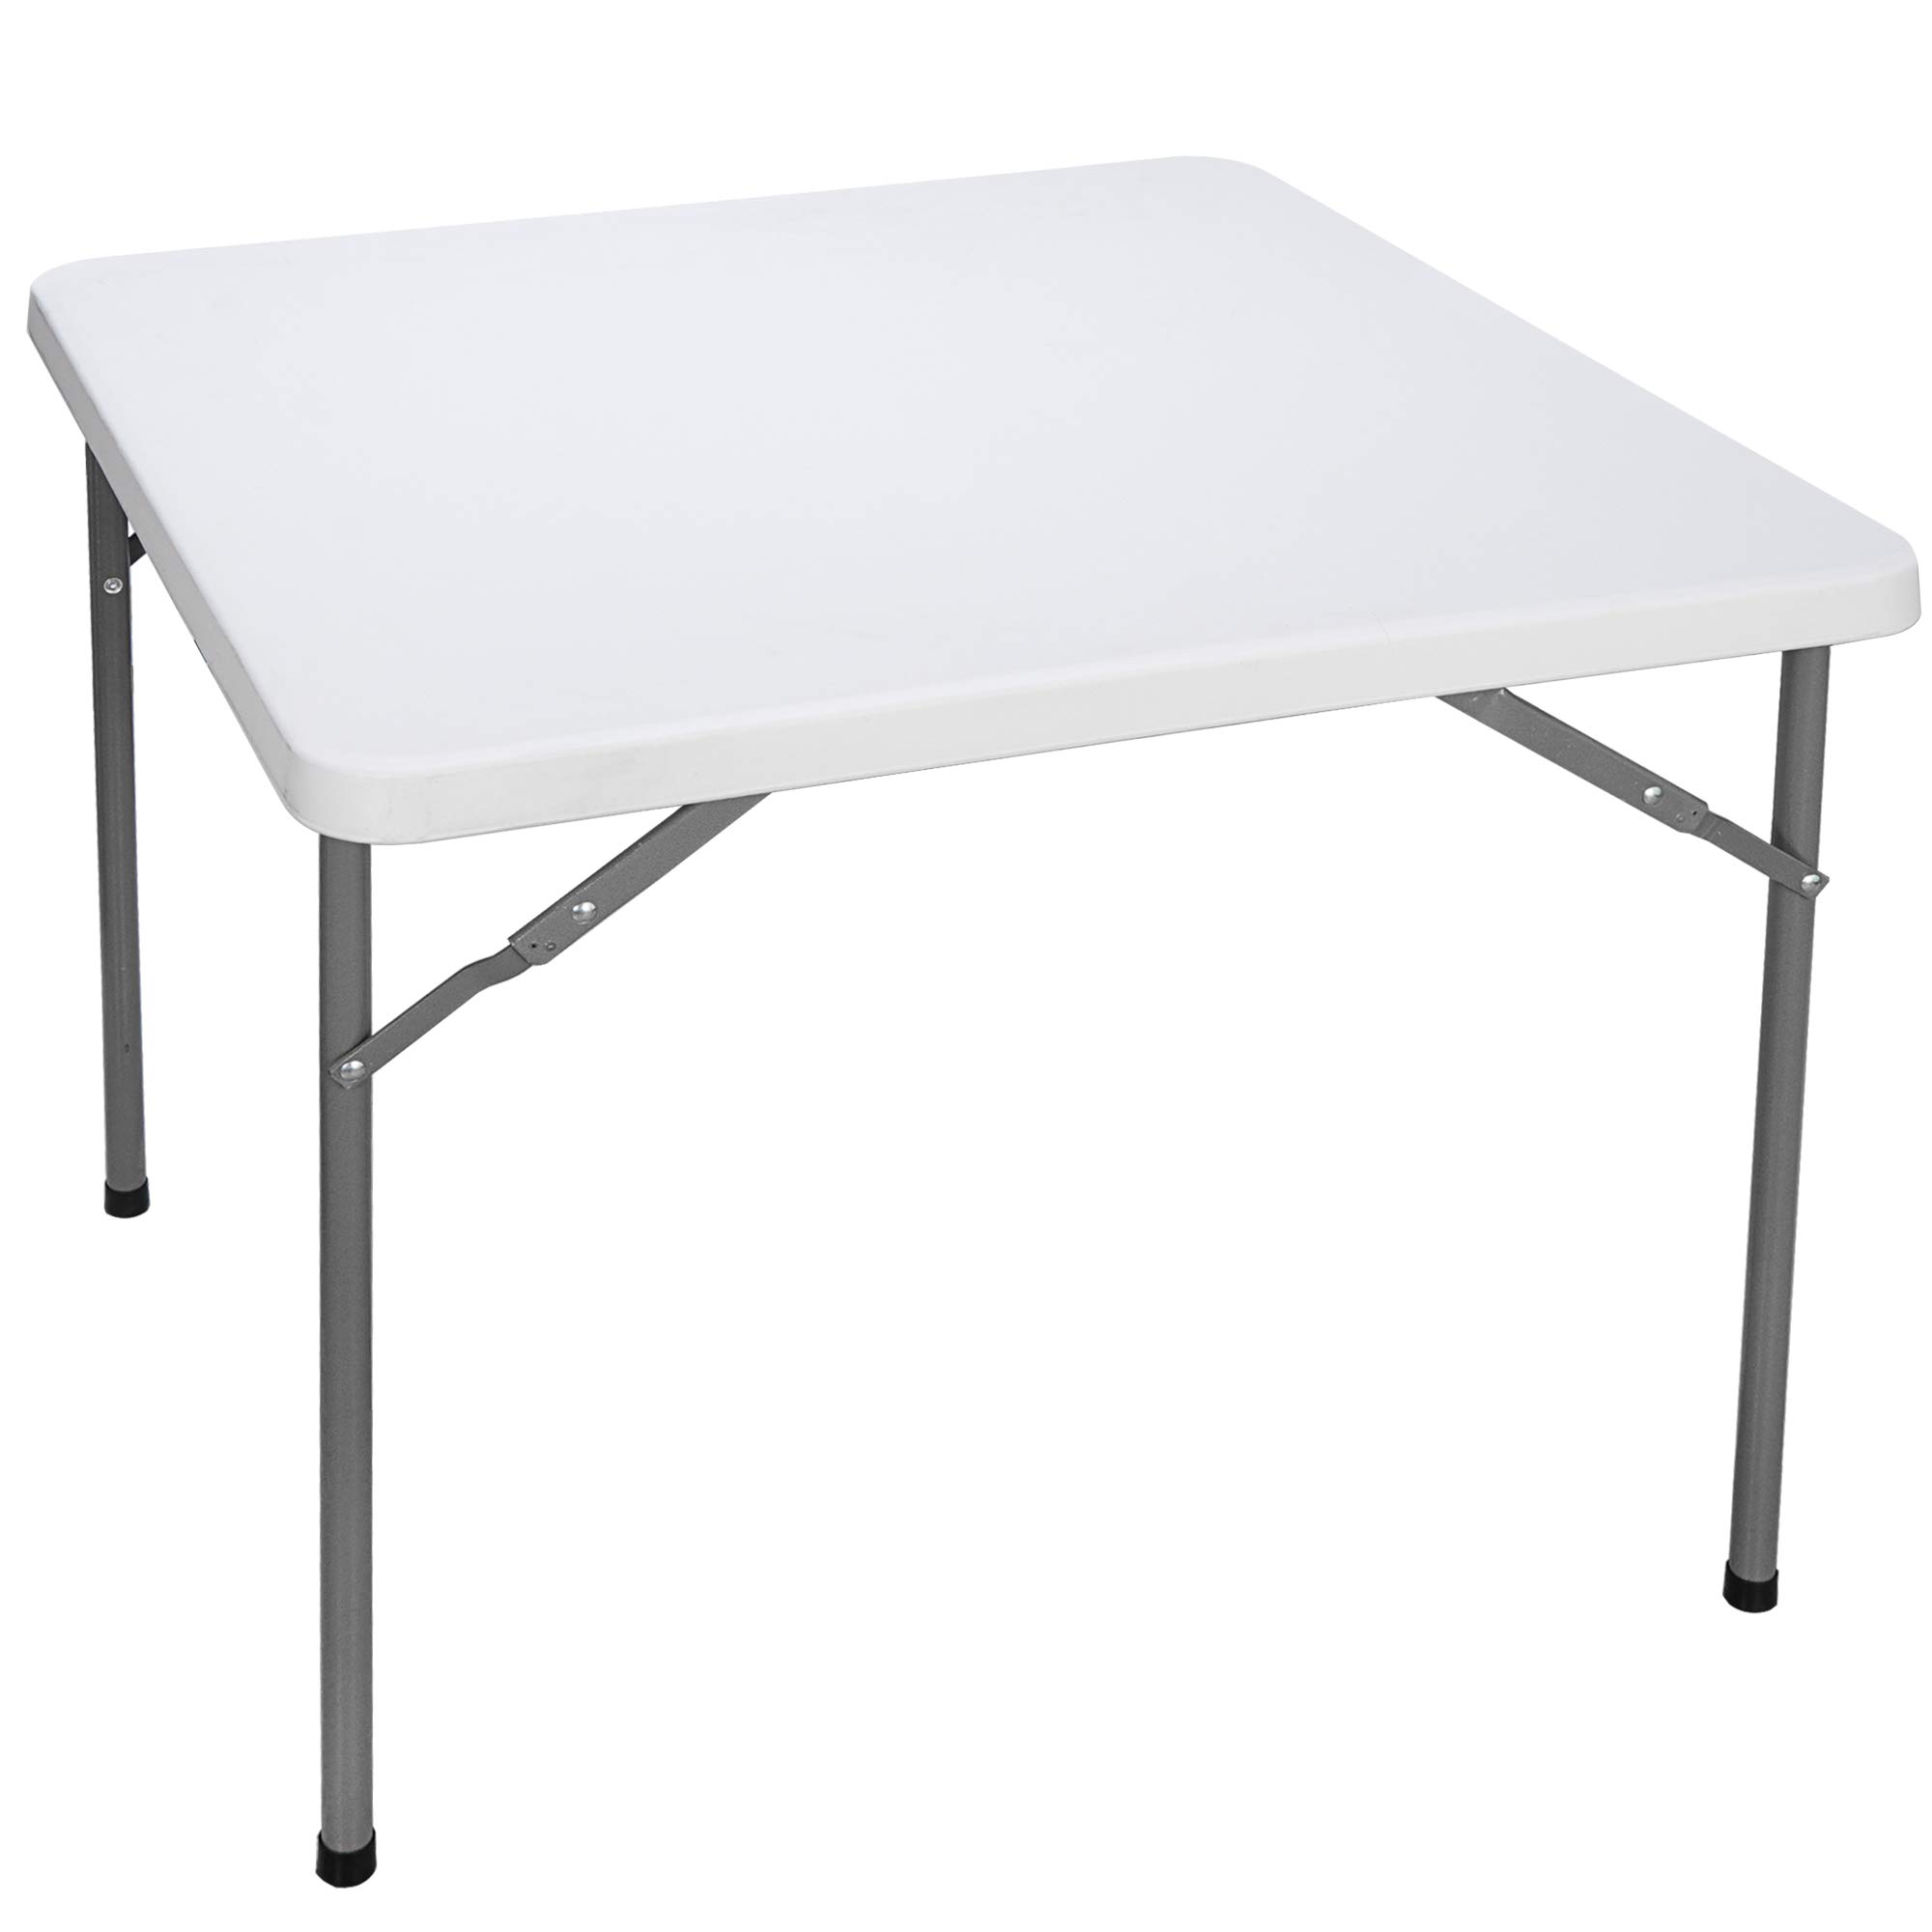 SUPER DEAL 3 Foot Square Folding Card Table, Indoor Outdoor Portable Plastic Kitchen or Camping Picnic Party Wedding Event Table